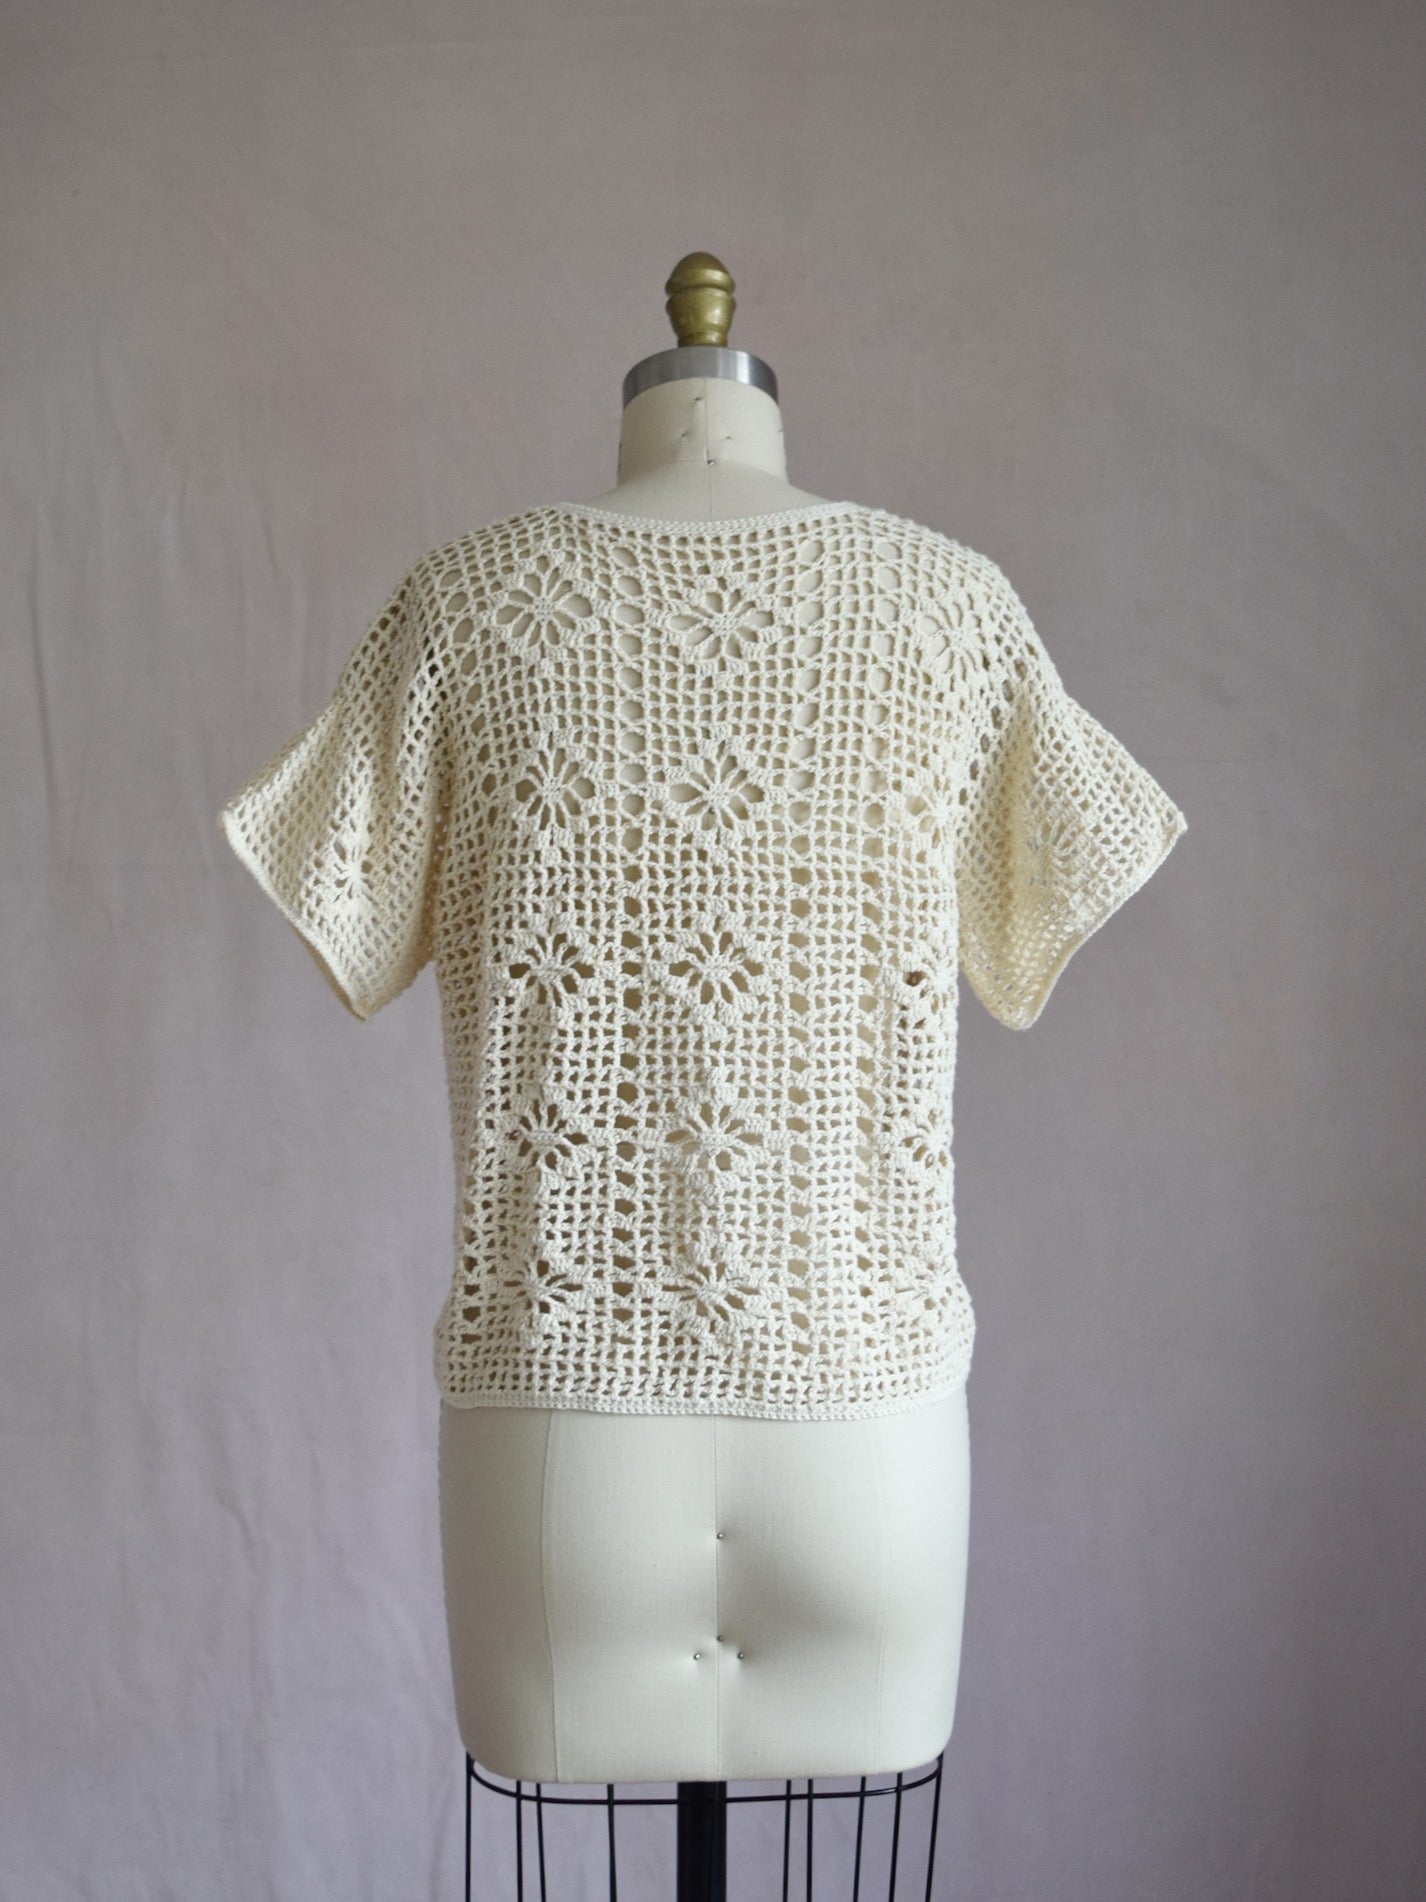 How to Crochet a Short Sleeve Top